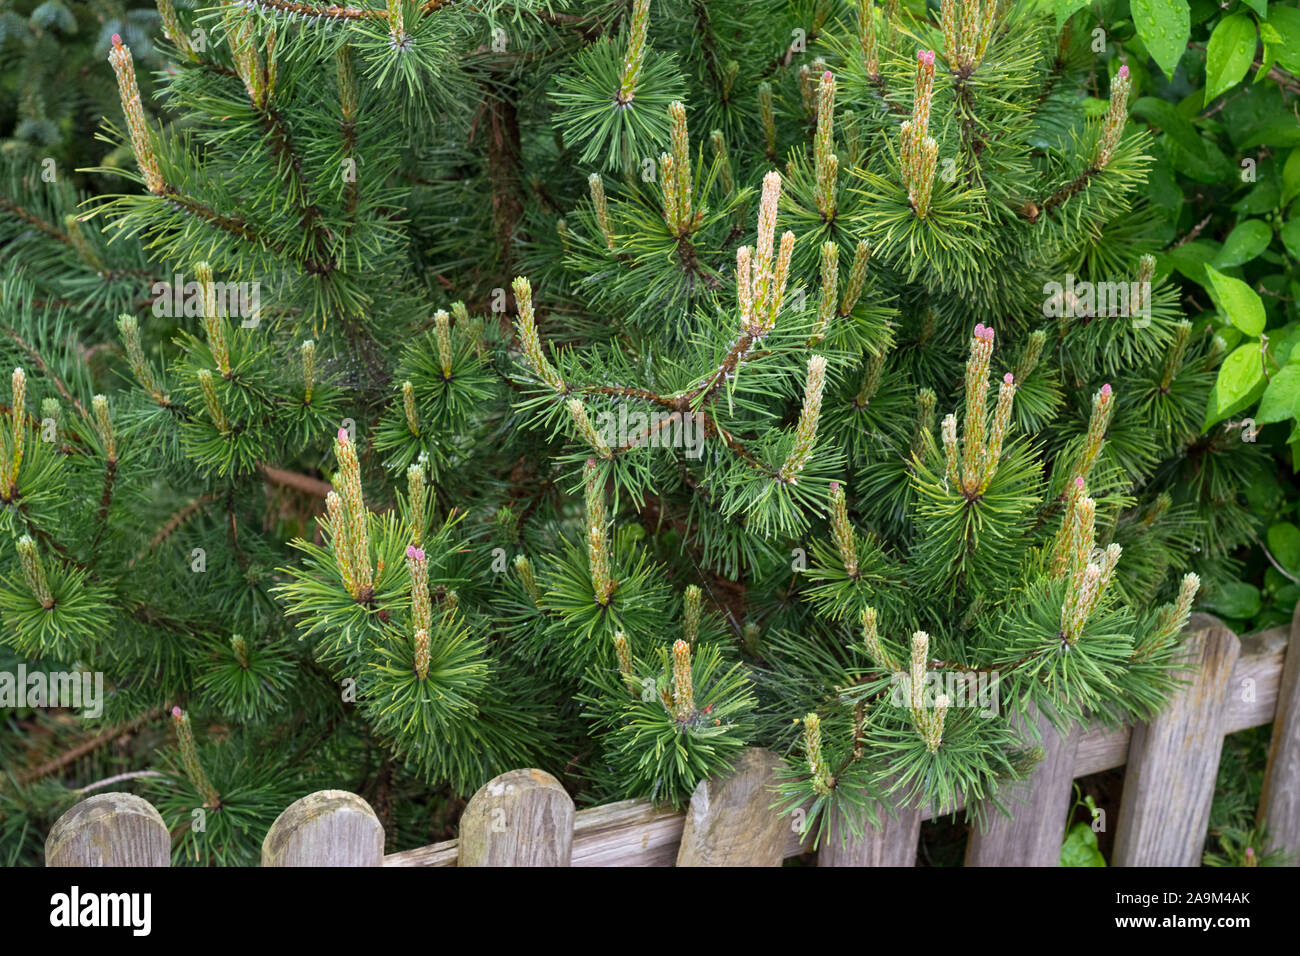 Pinus mugo mughus (dwarf mountain pine) during springtime with young shoots and developing female cones Stock Photo